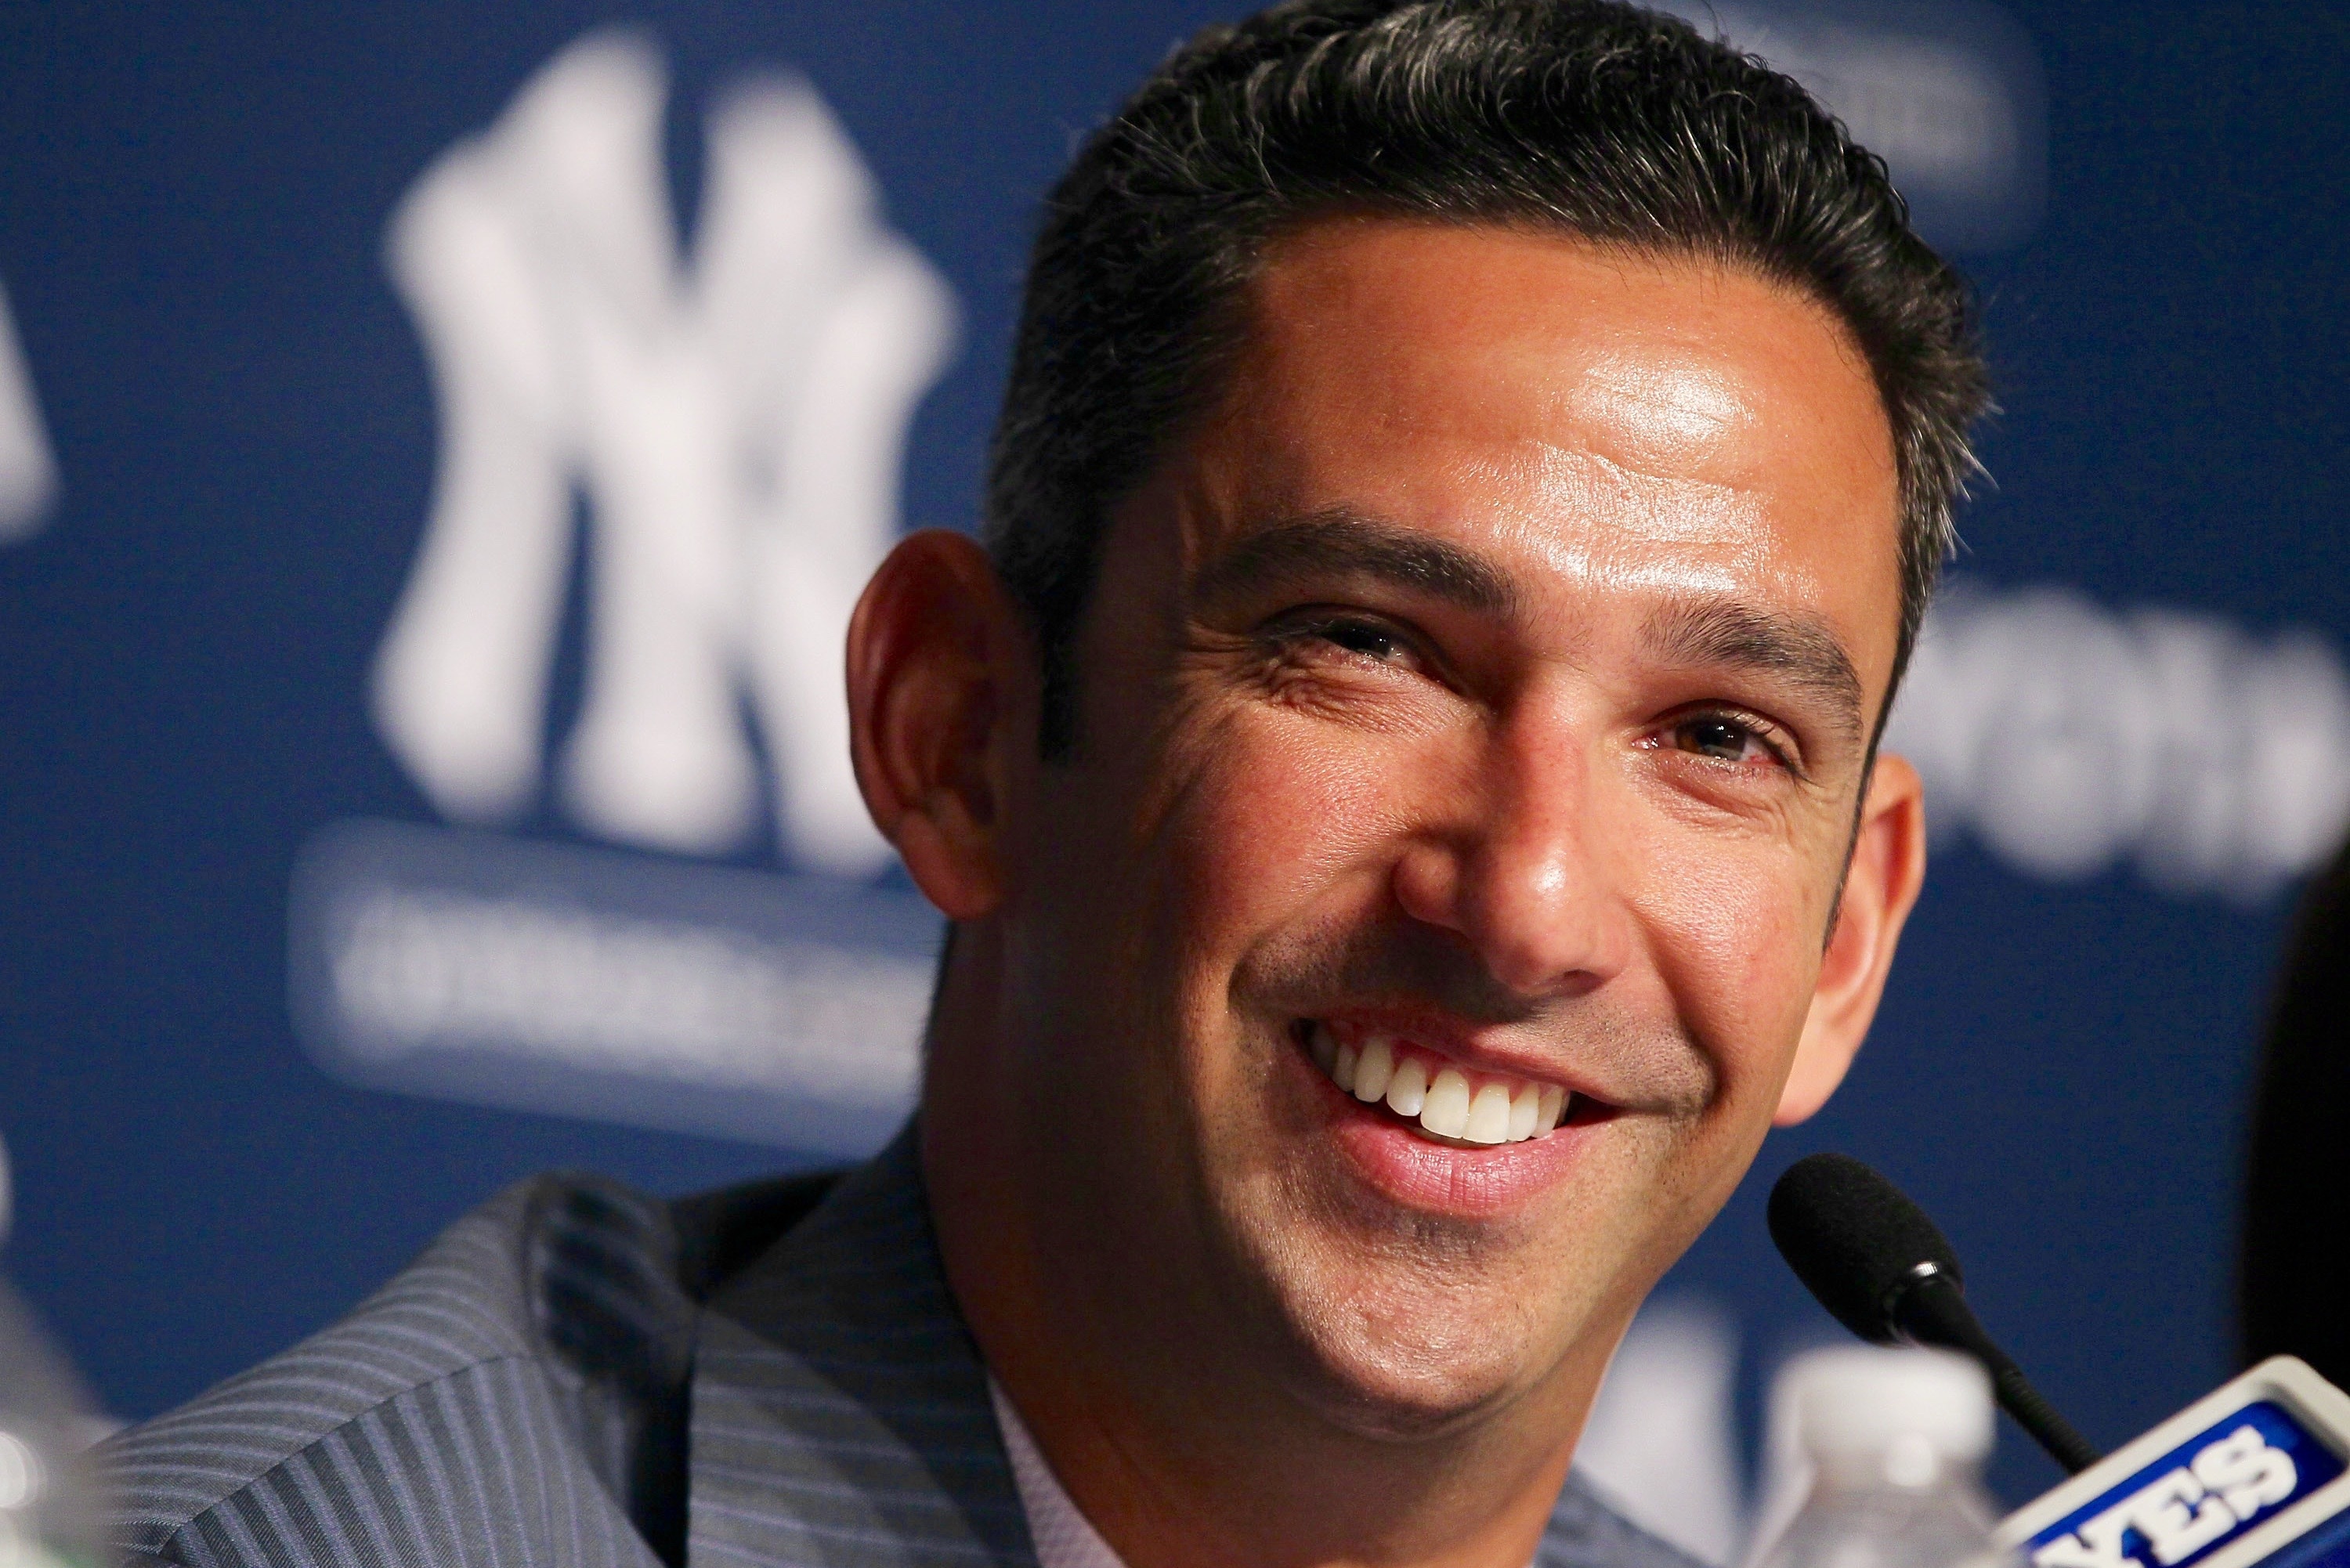 Yankees' Jorge Posada Embraces New Assignment - The New York Times